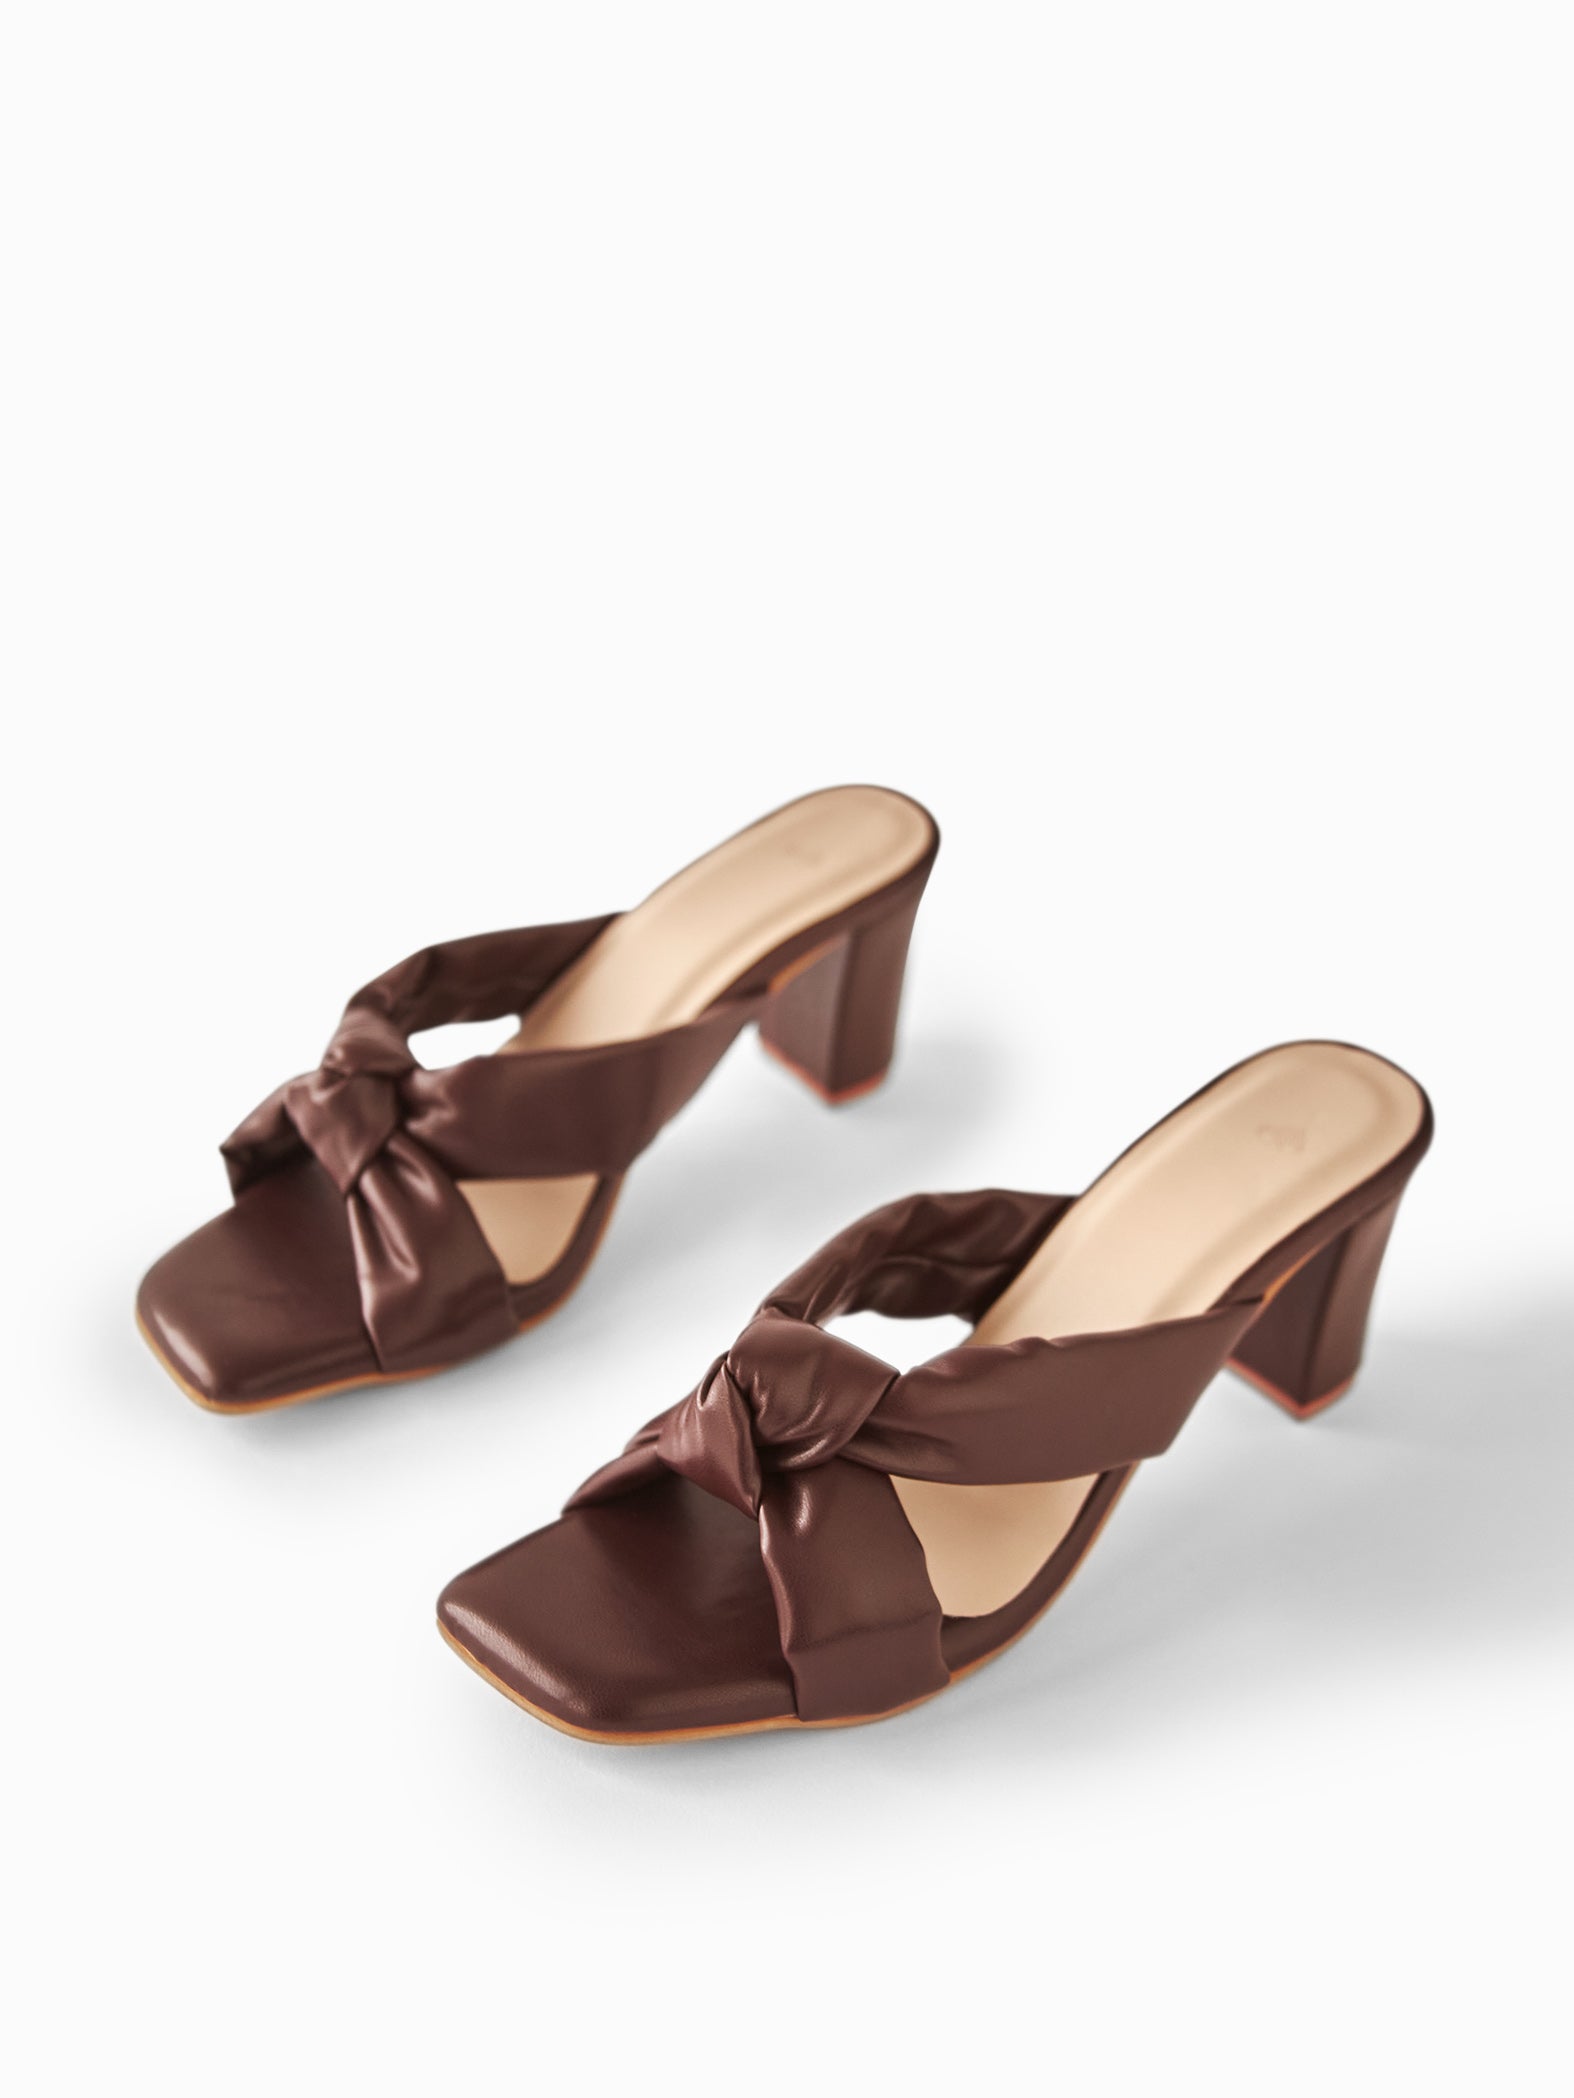 Cocoa Knotted Block Heels